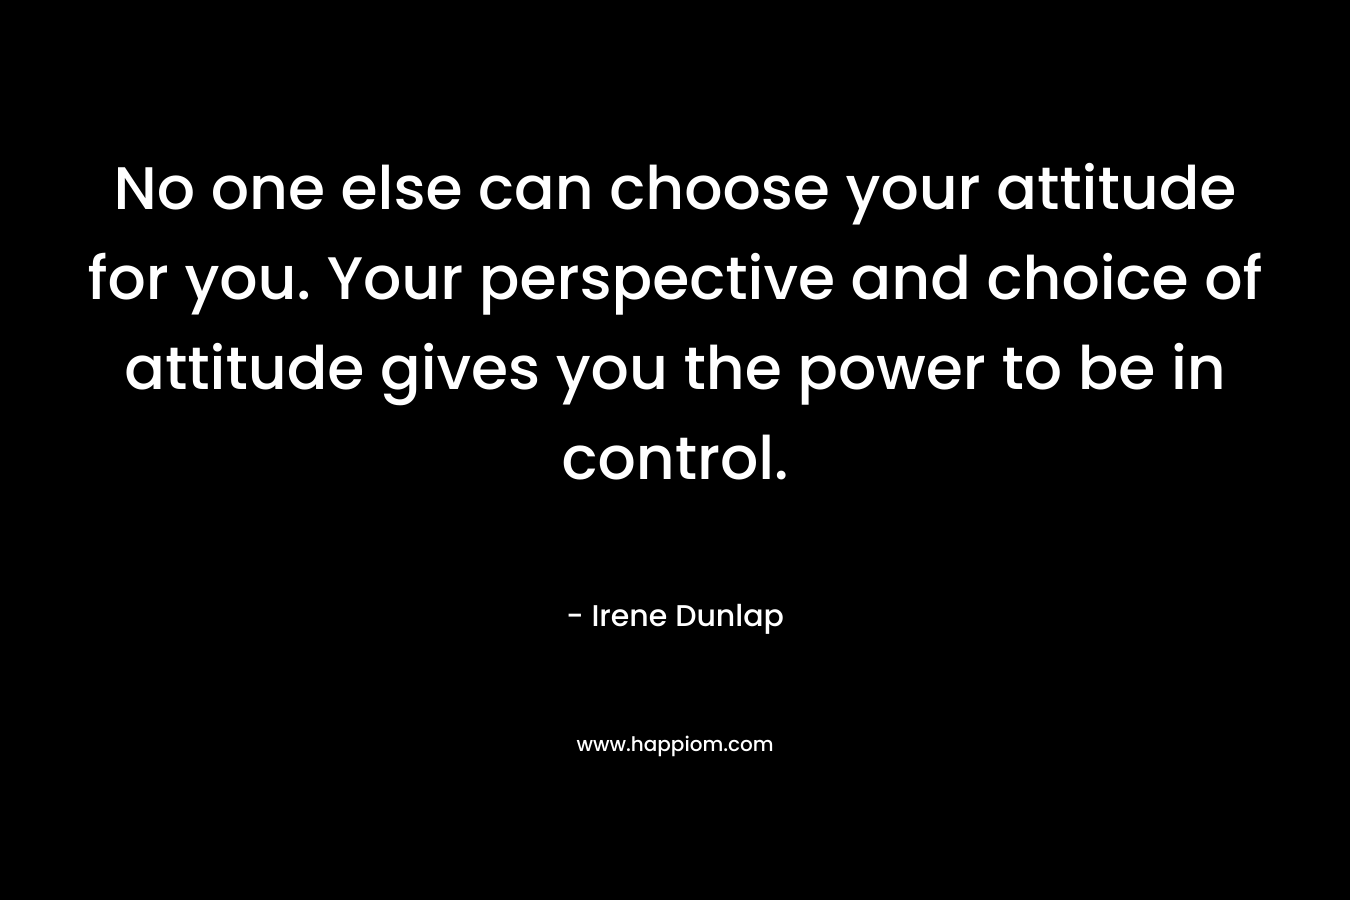 No one else can choose your attitude for you. Your perspective and choice of attitude gives you the power to be in control.